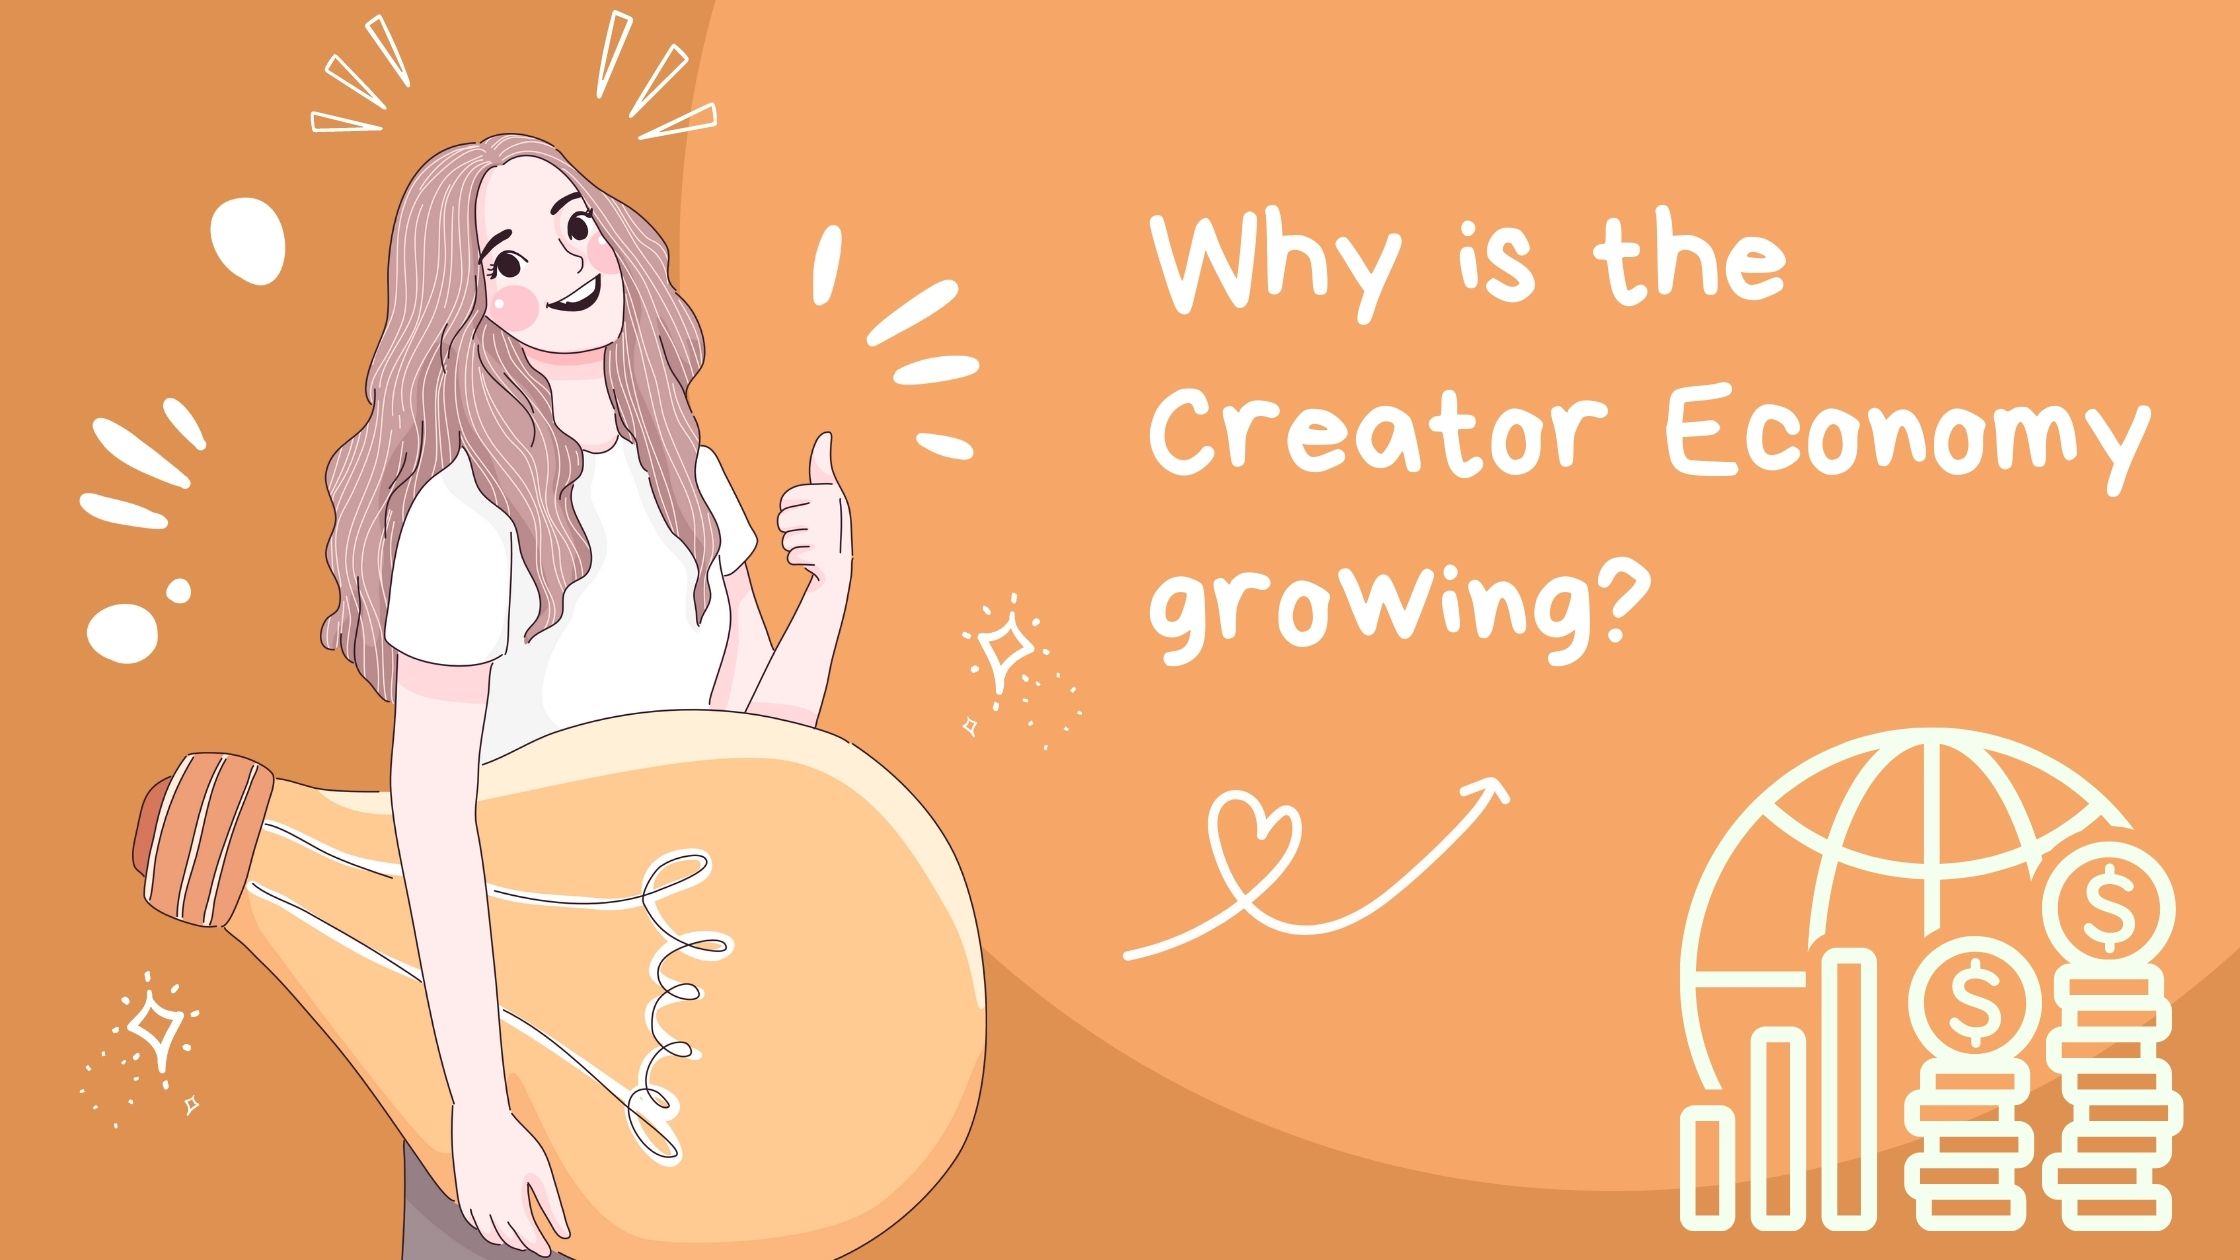 Why is the Creator Economy Growing?